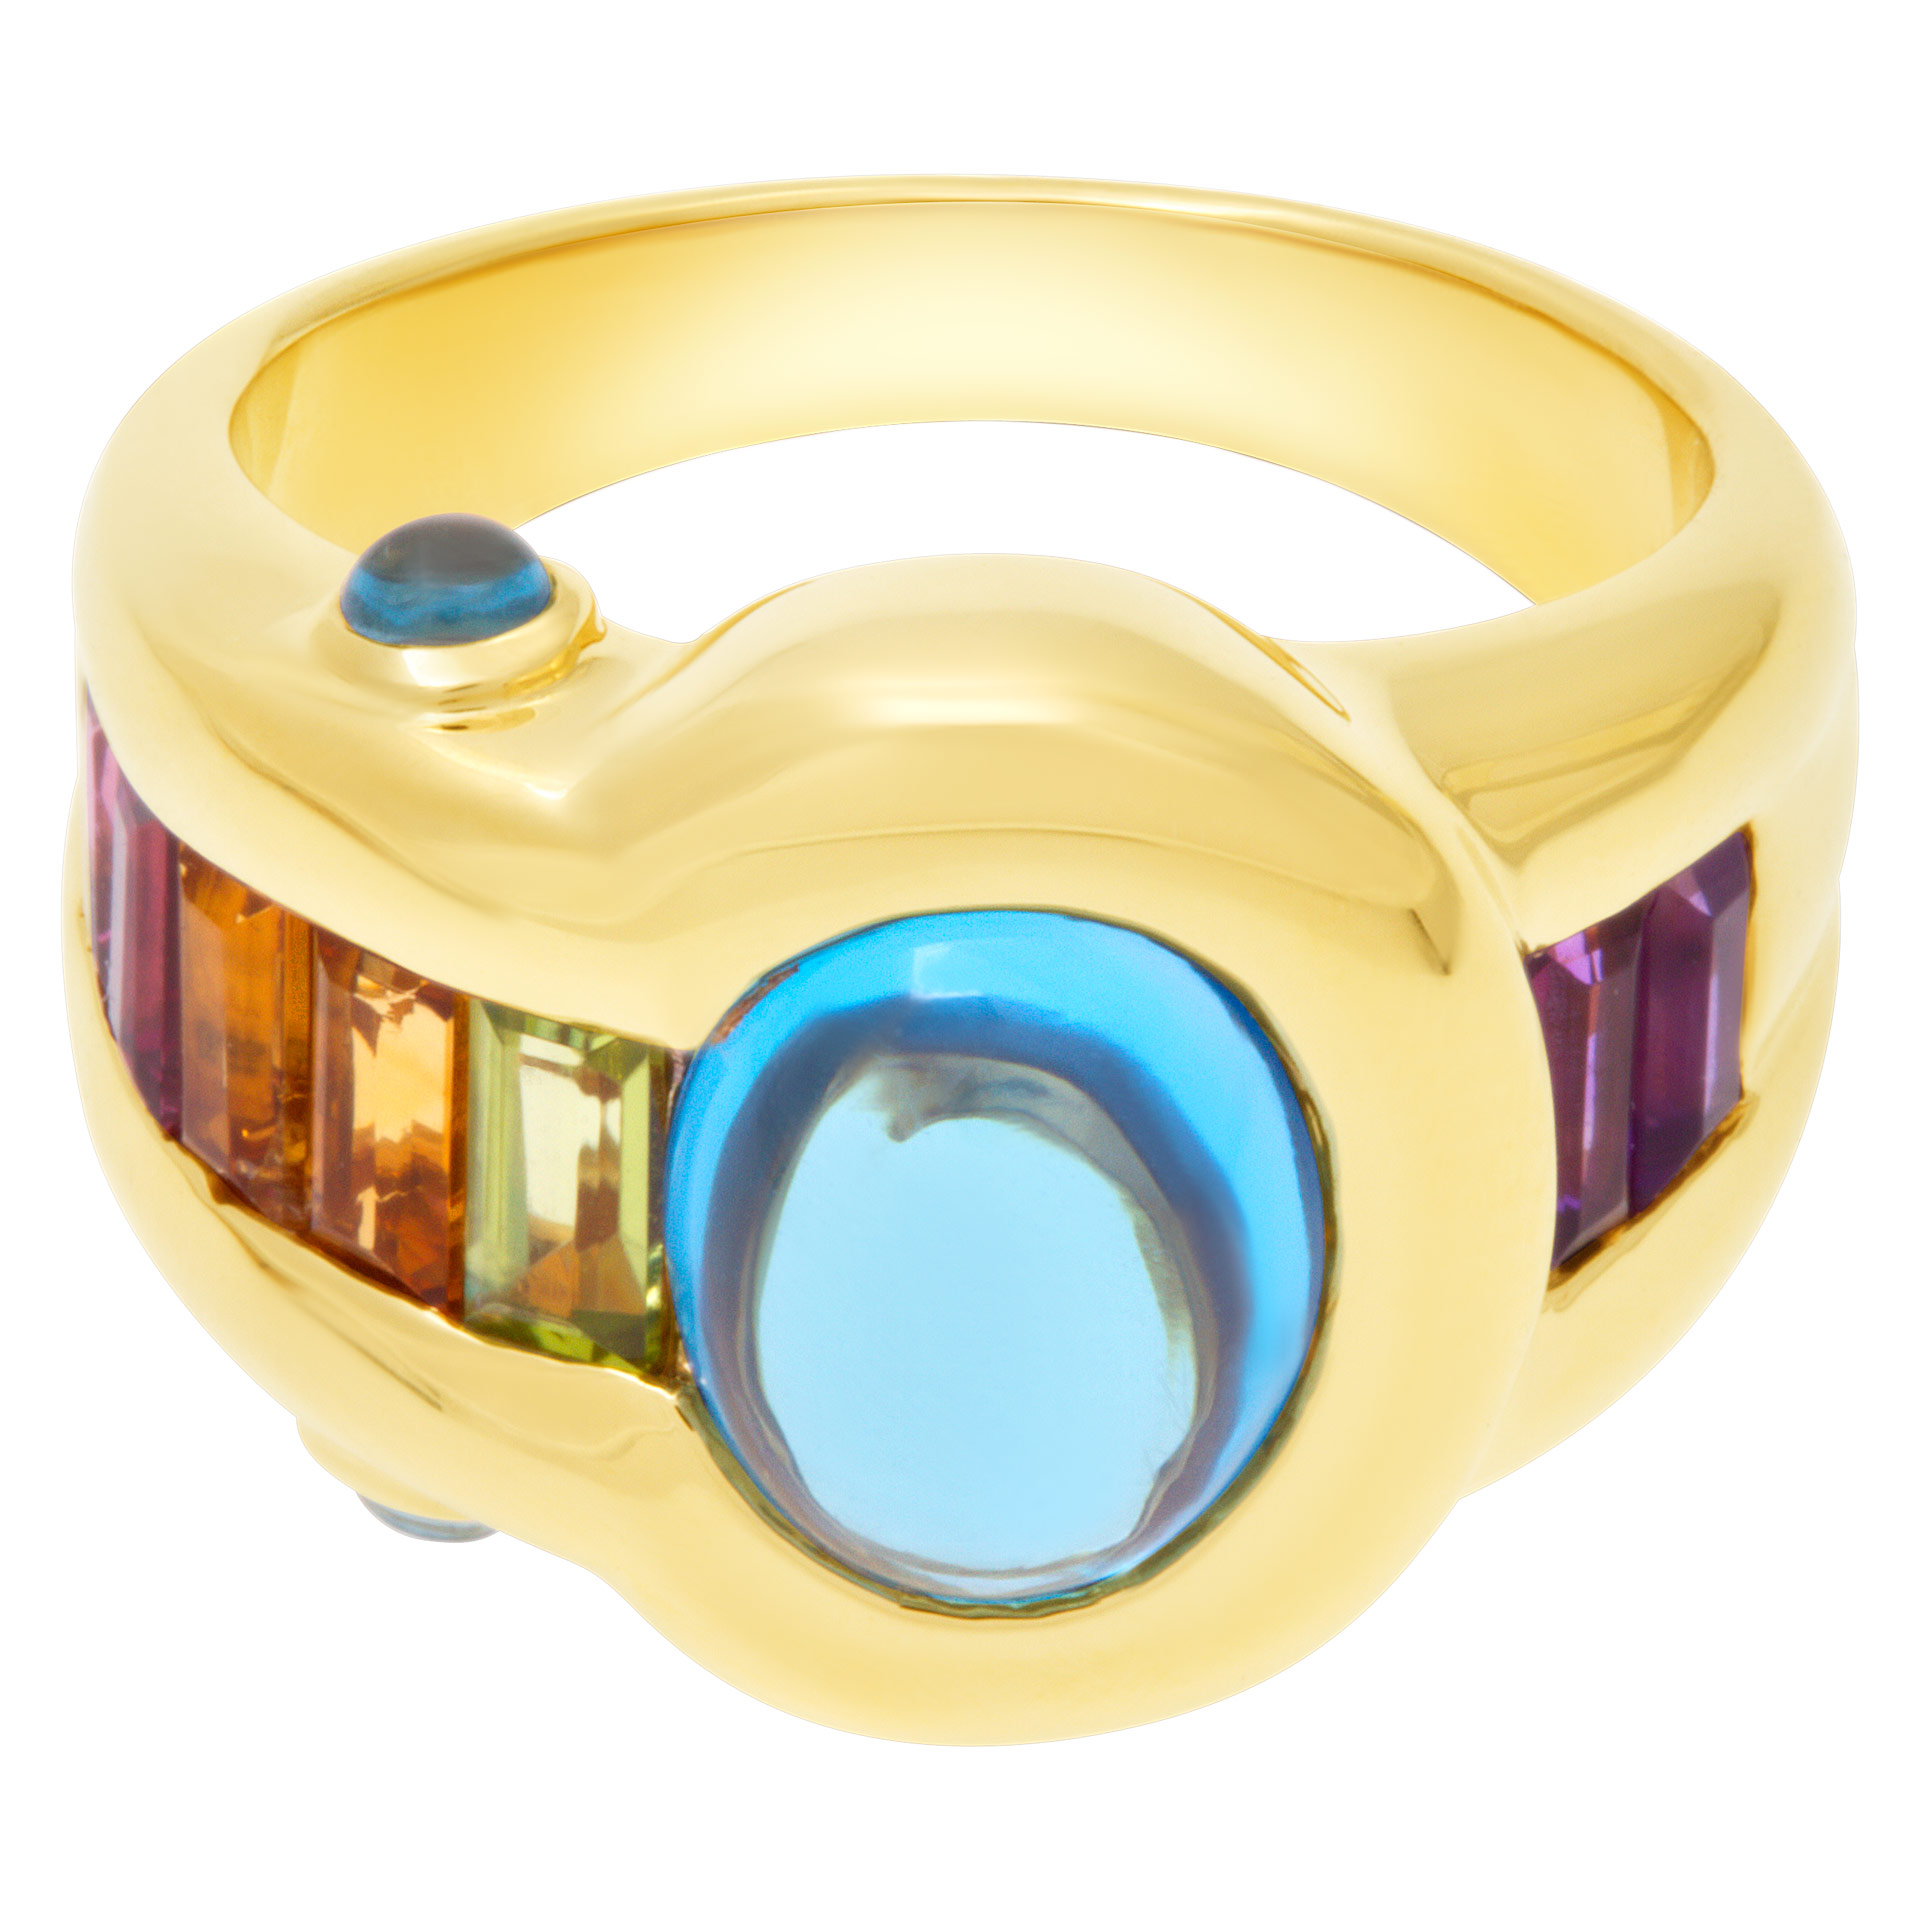 Blue Topaz cabochon ring in 18k yellow gold with amethyst & semi-precious stones